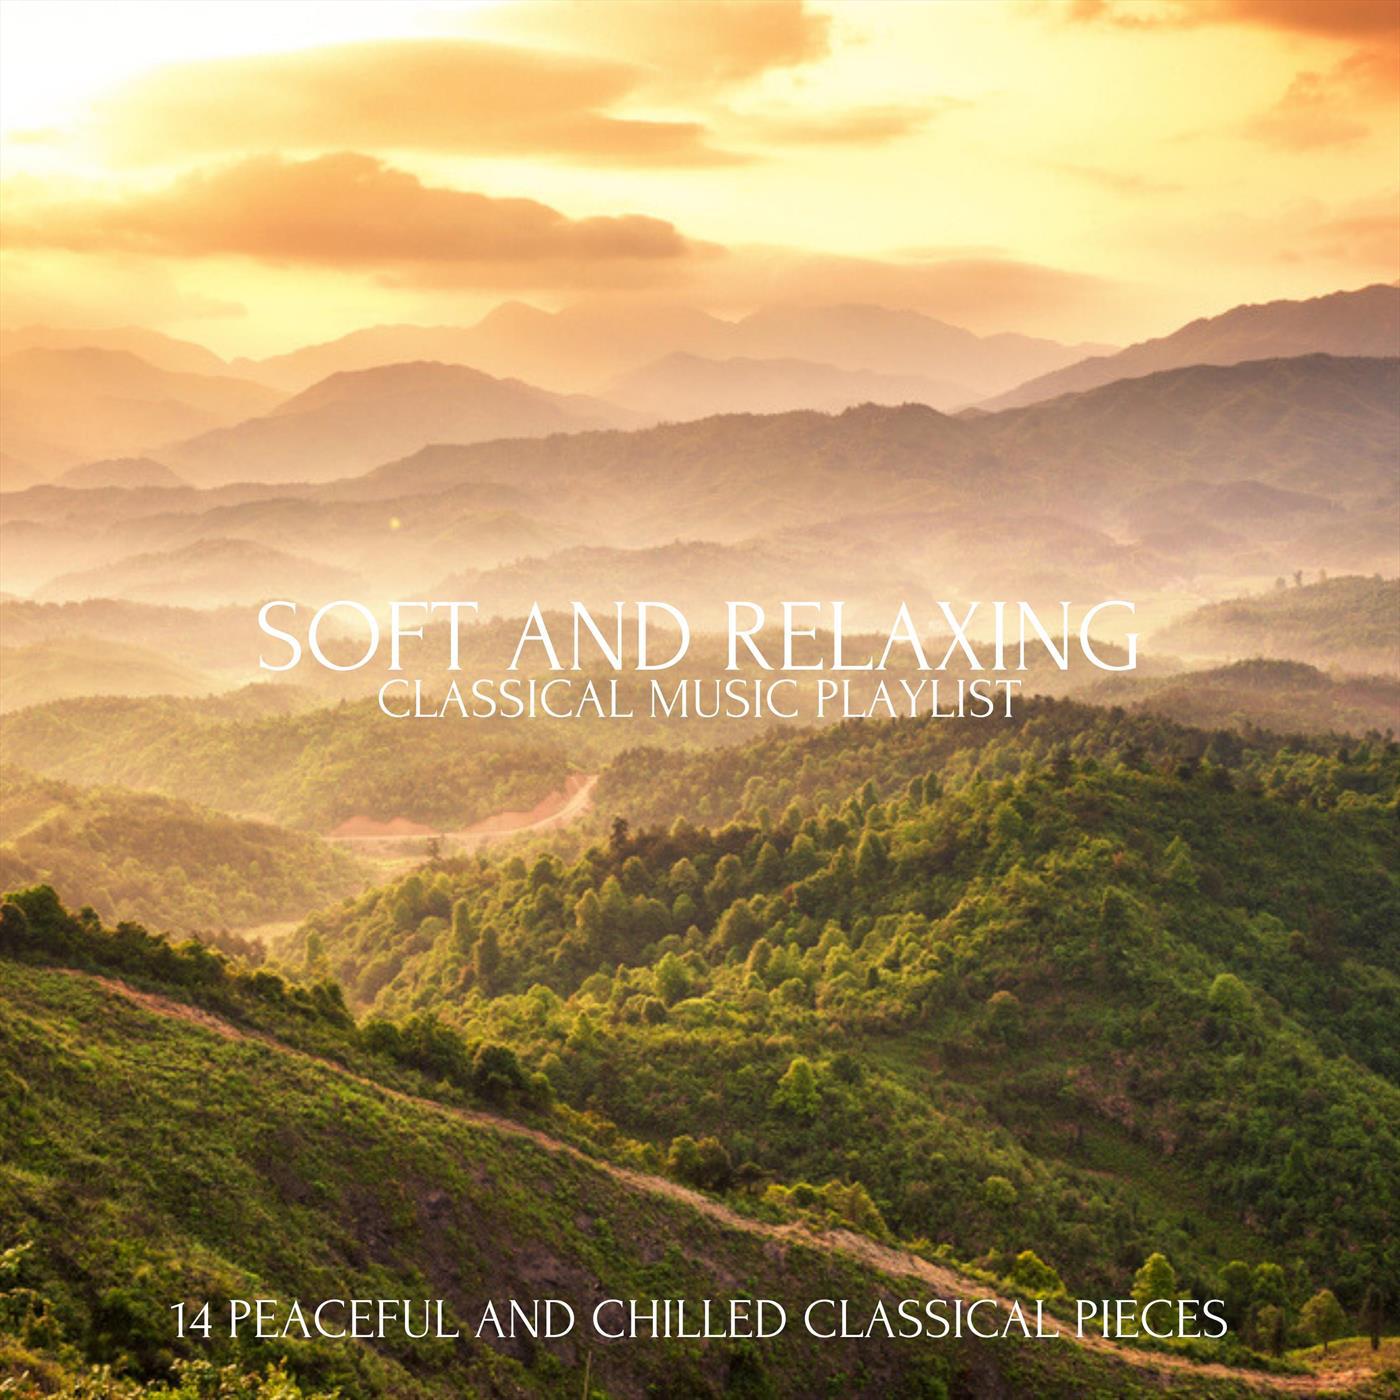 Soft and Relaxing Classical Music Playlist: 14 Peaceful and Chilled Classical Pieces